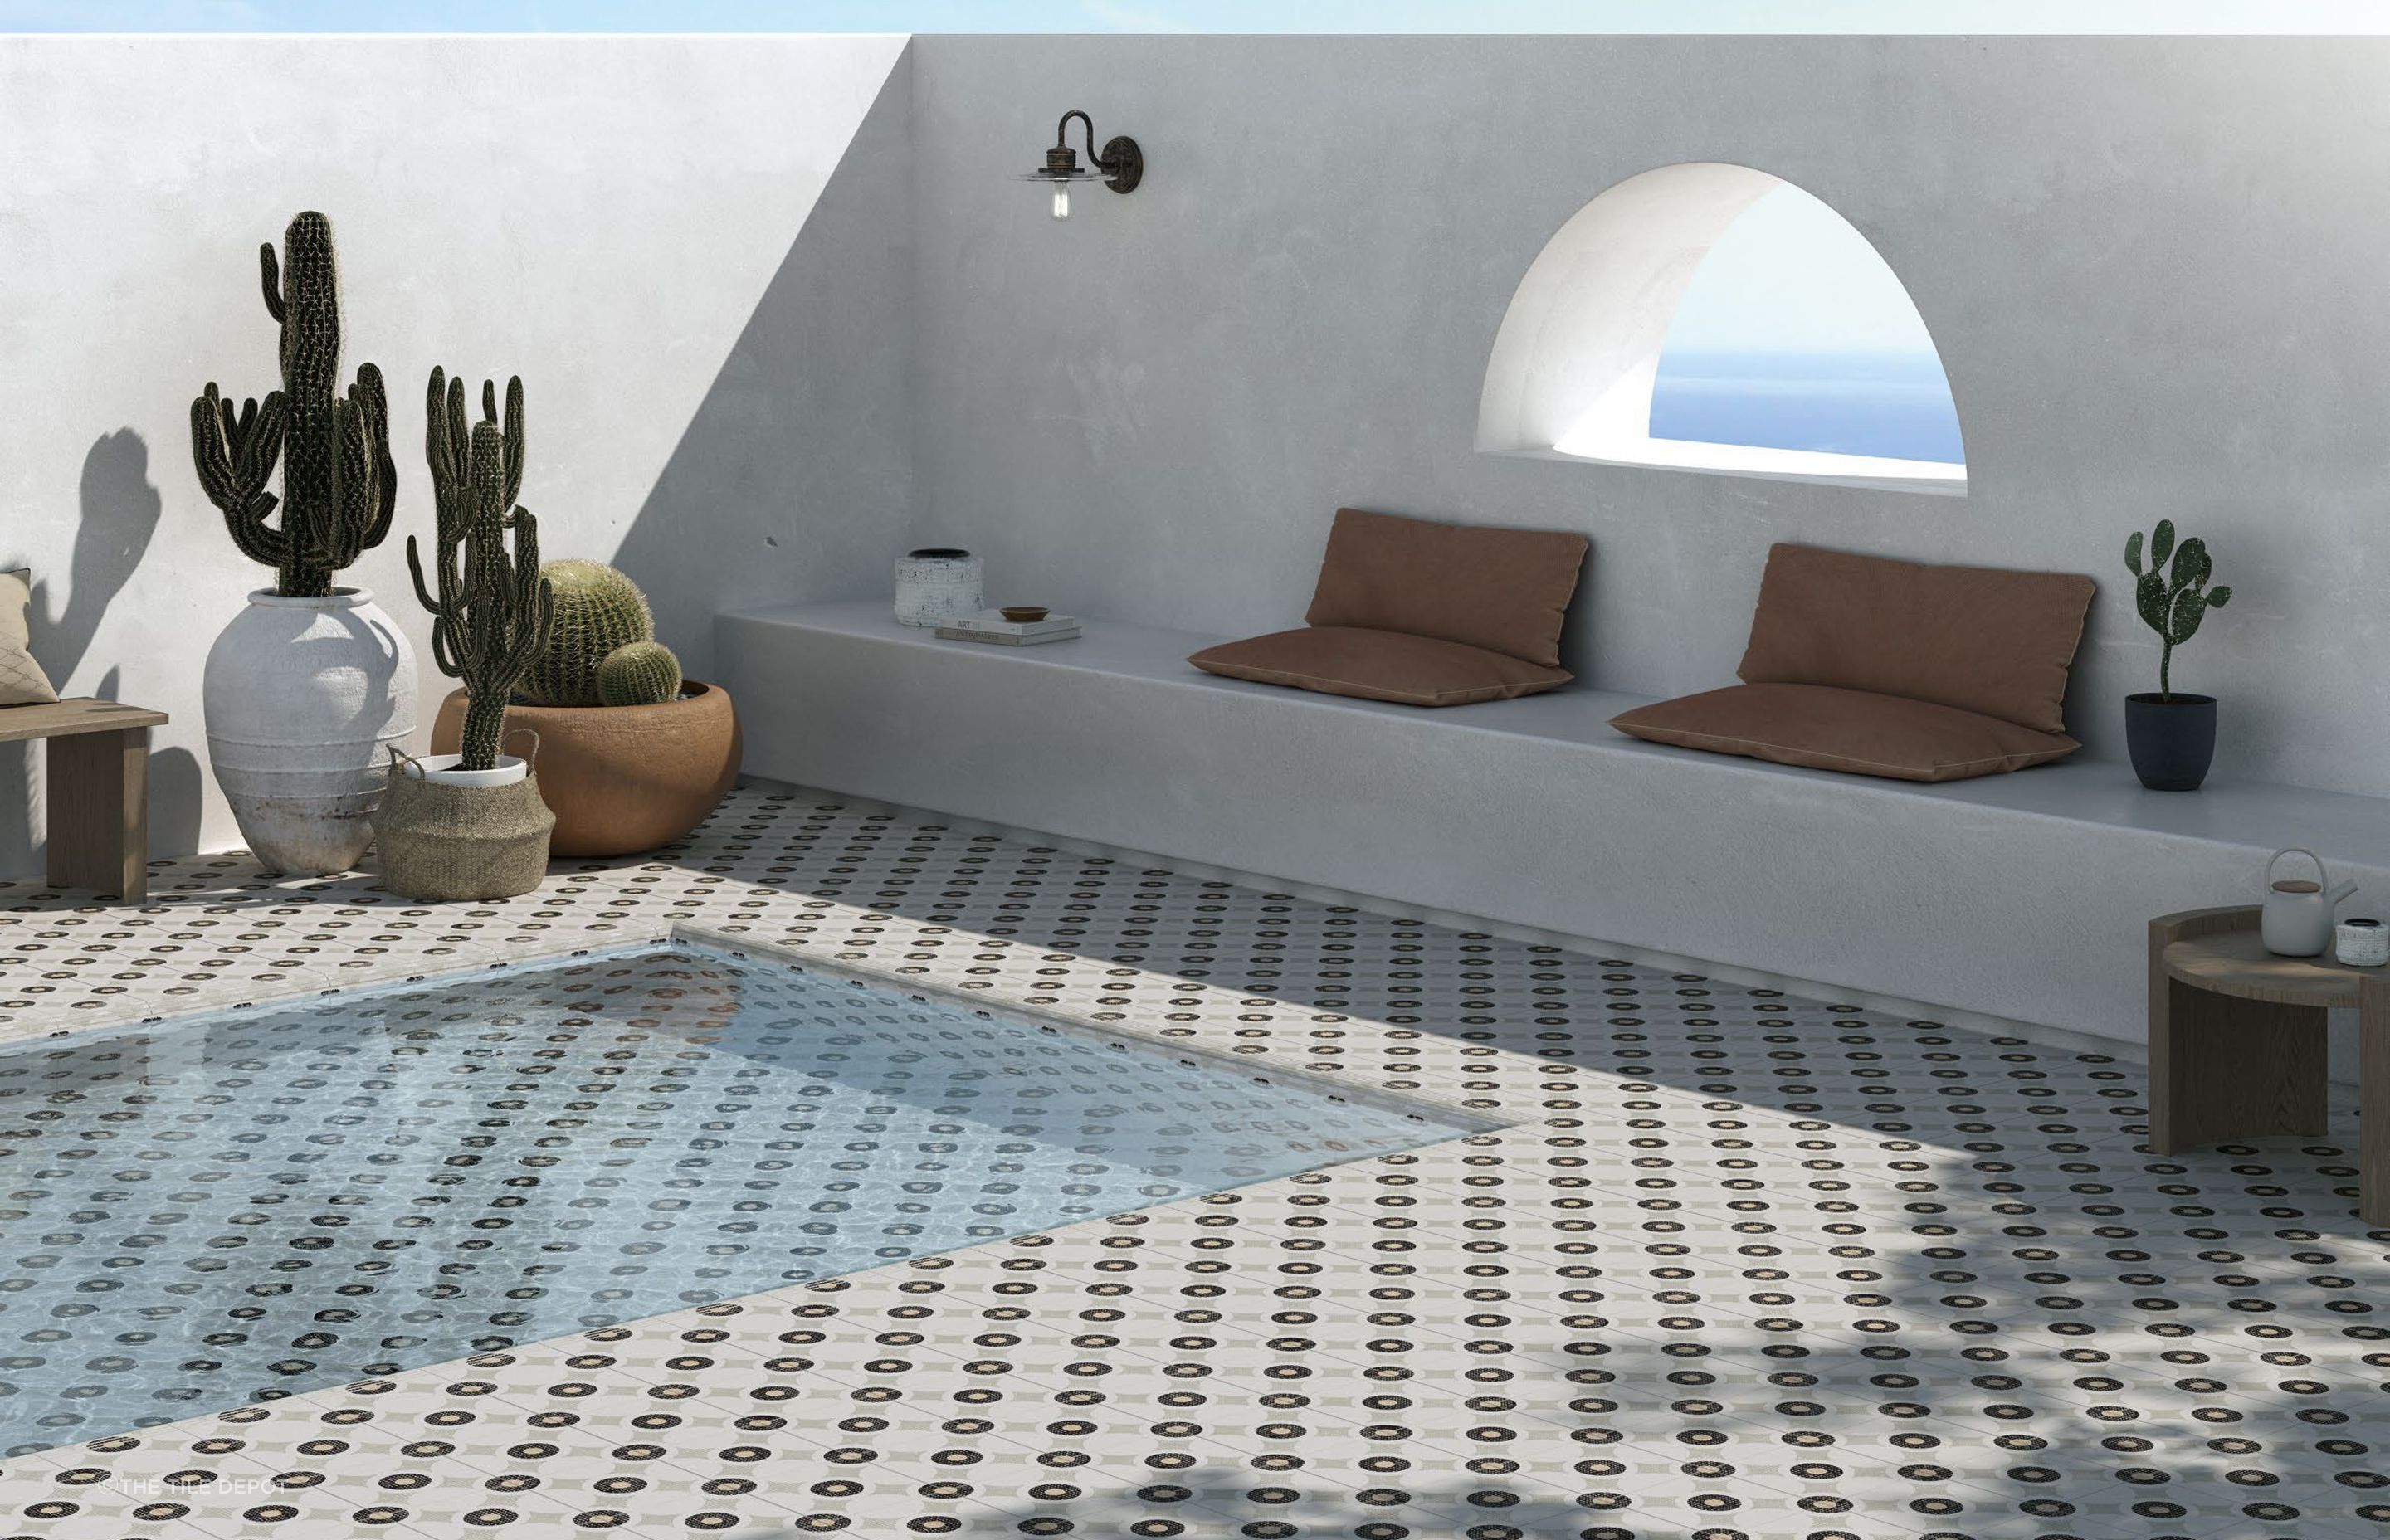 The stunning Cementina Open Air Floor Tiles, a great example of the encaustic style.